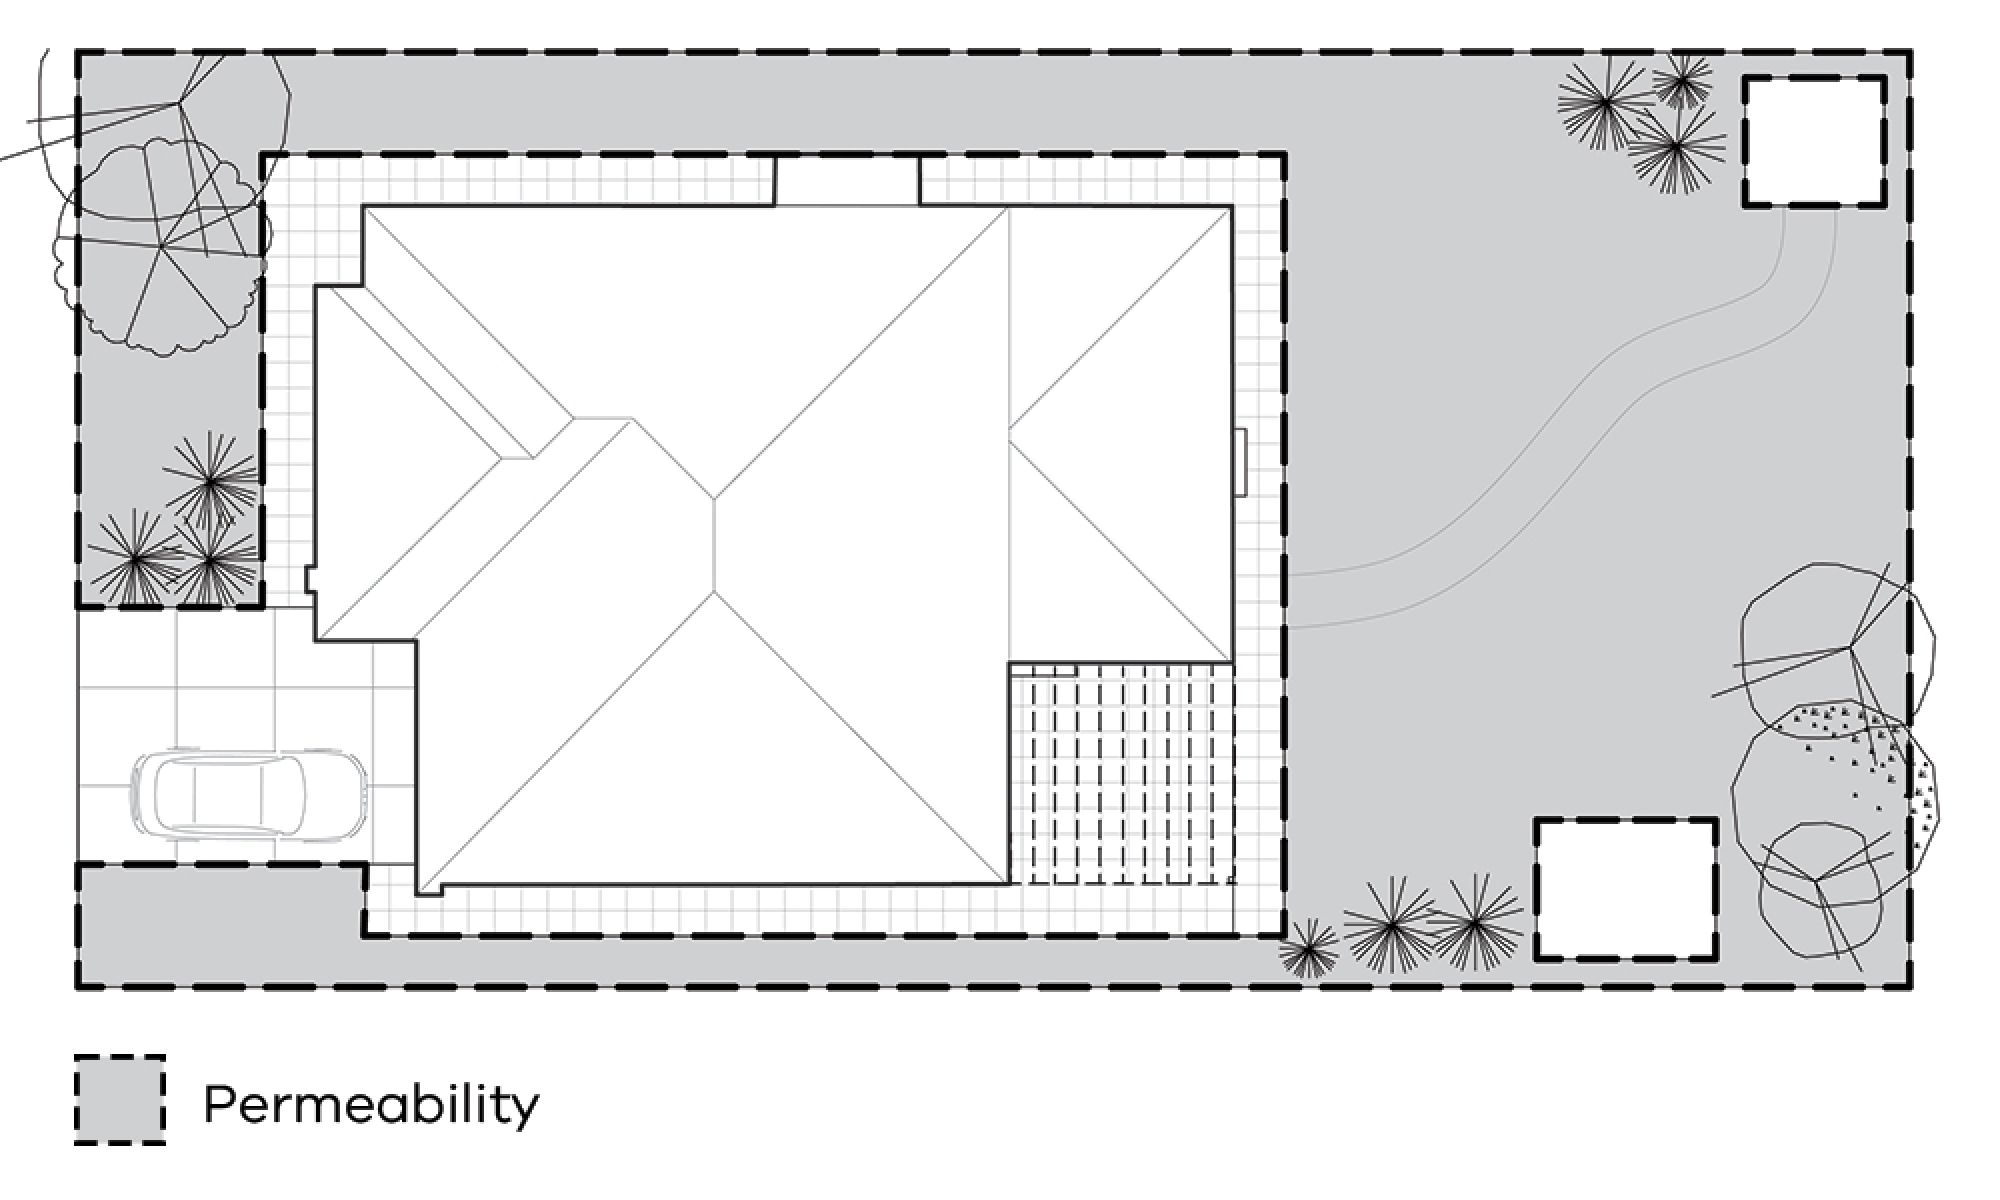 Plan showing driveway, house,, areas under overhang of eaves and balcony, back patio, garden shed and covered barbecue area as non-permeable areas.